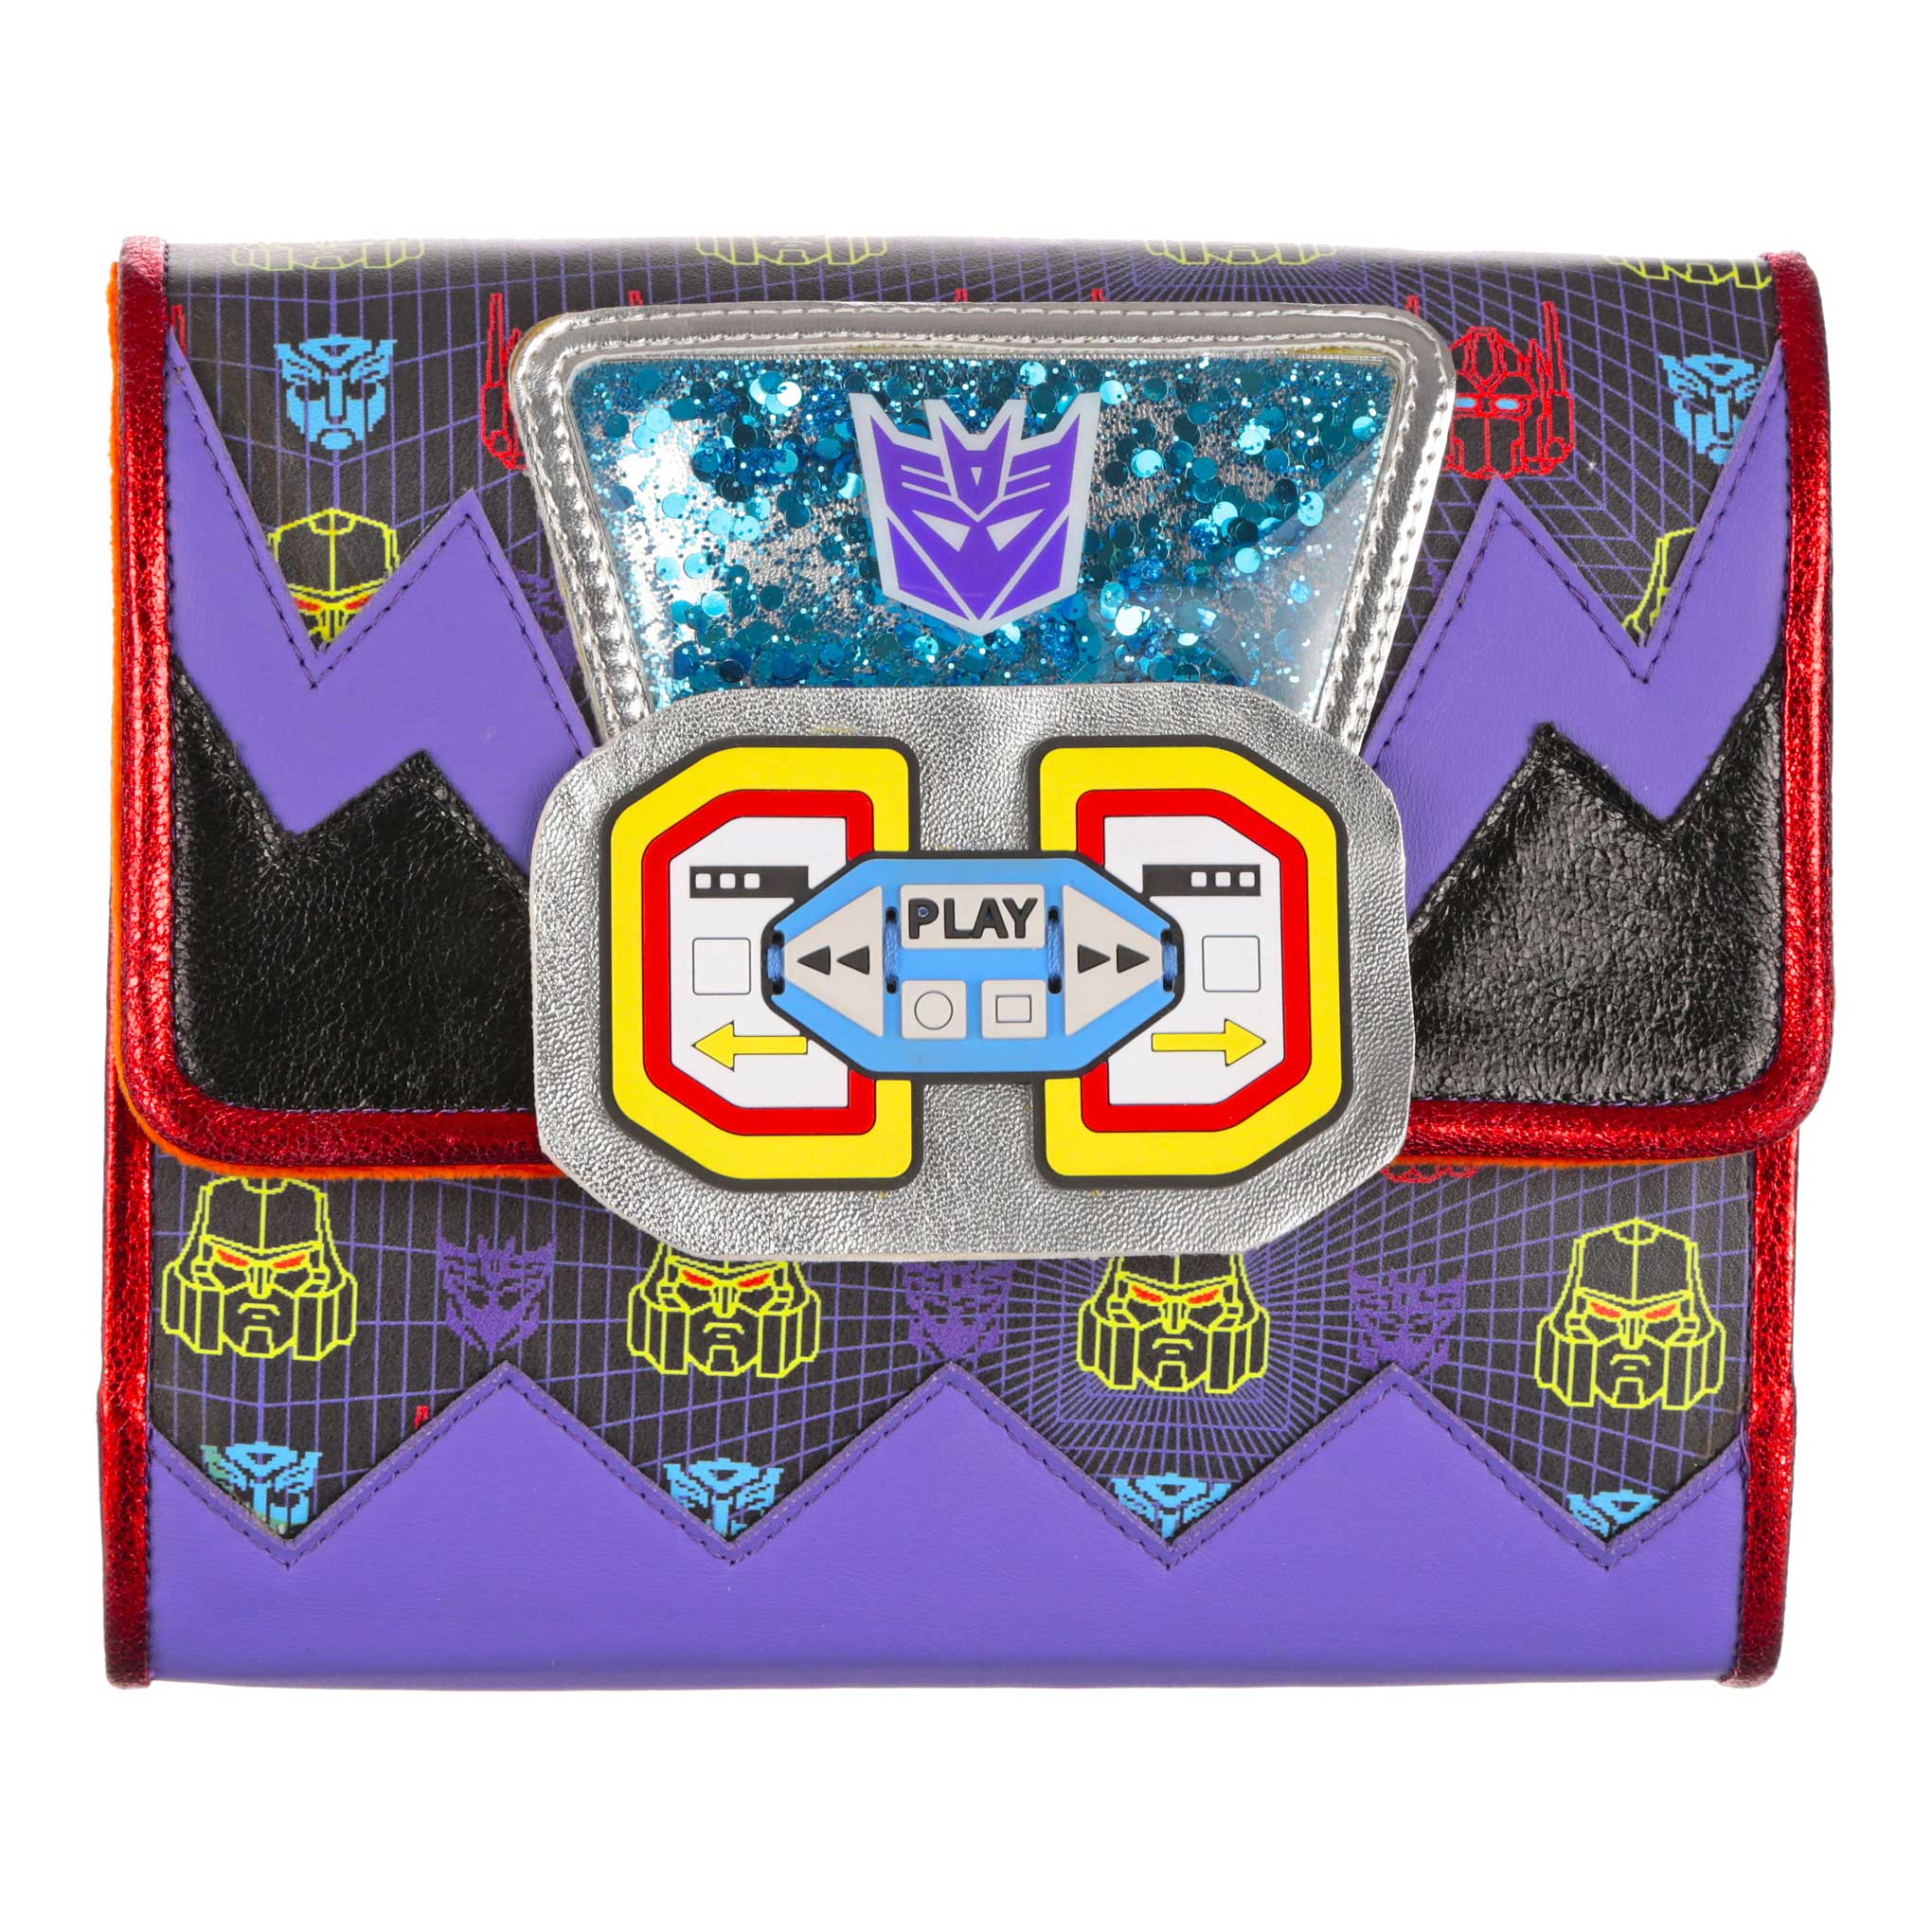 A Transformers themed handbag with retro 80’s cassette tape logo on the front tab. A purple Decepticon logo sits at the top of the clutch bag with blue sparkly metallic background. Chunky purple zigzag details and a black geometric pixal art print covers all over the body of this small Transformers bag. Finished off with red metallic piping. 